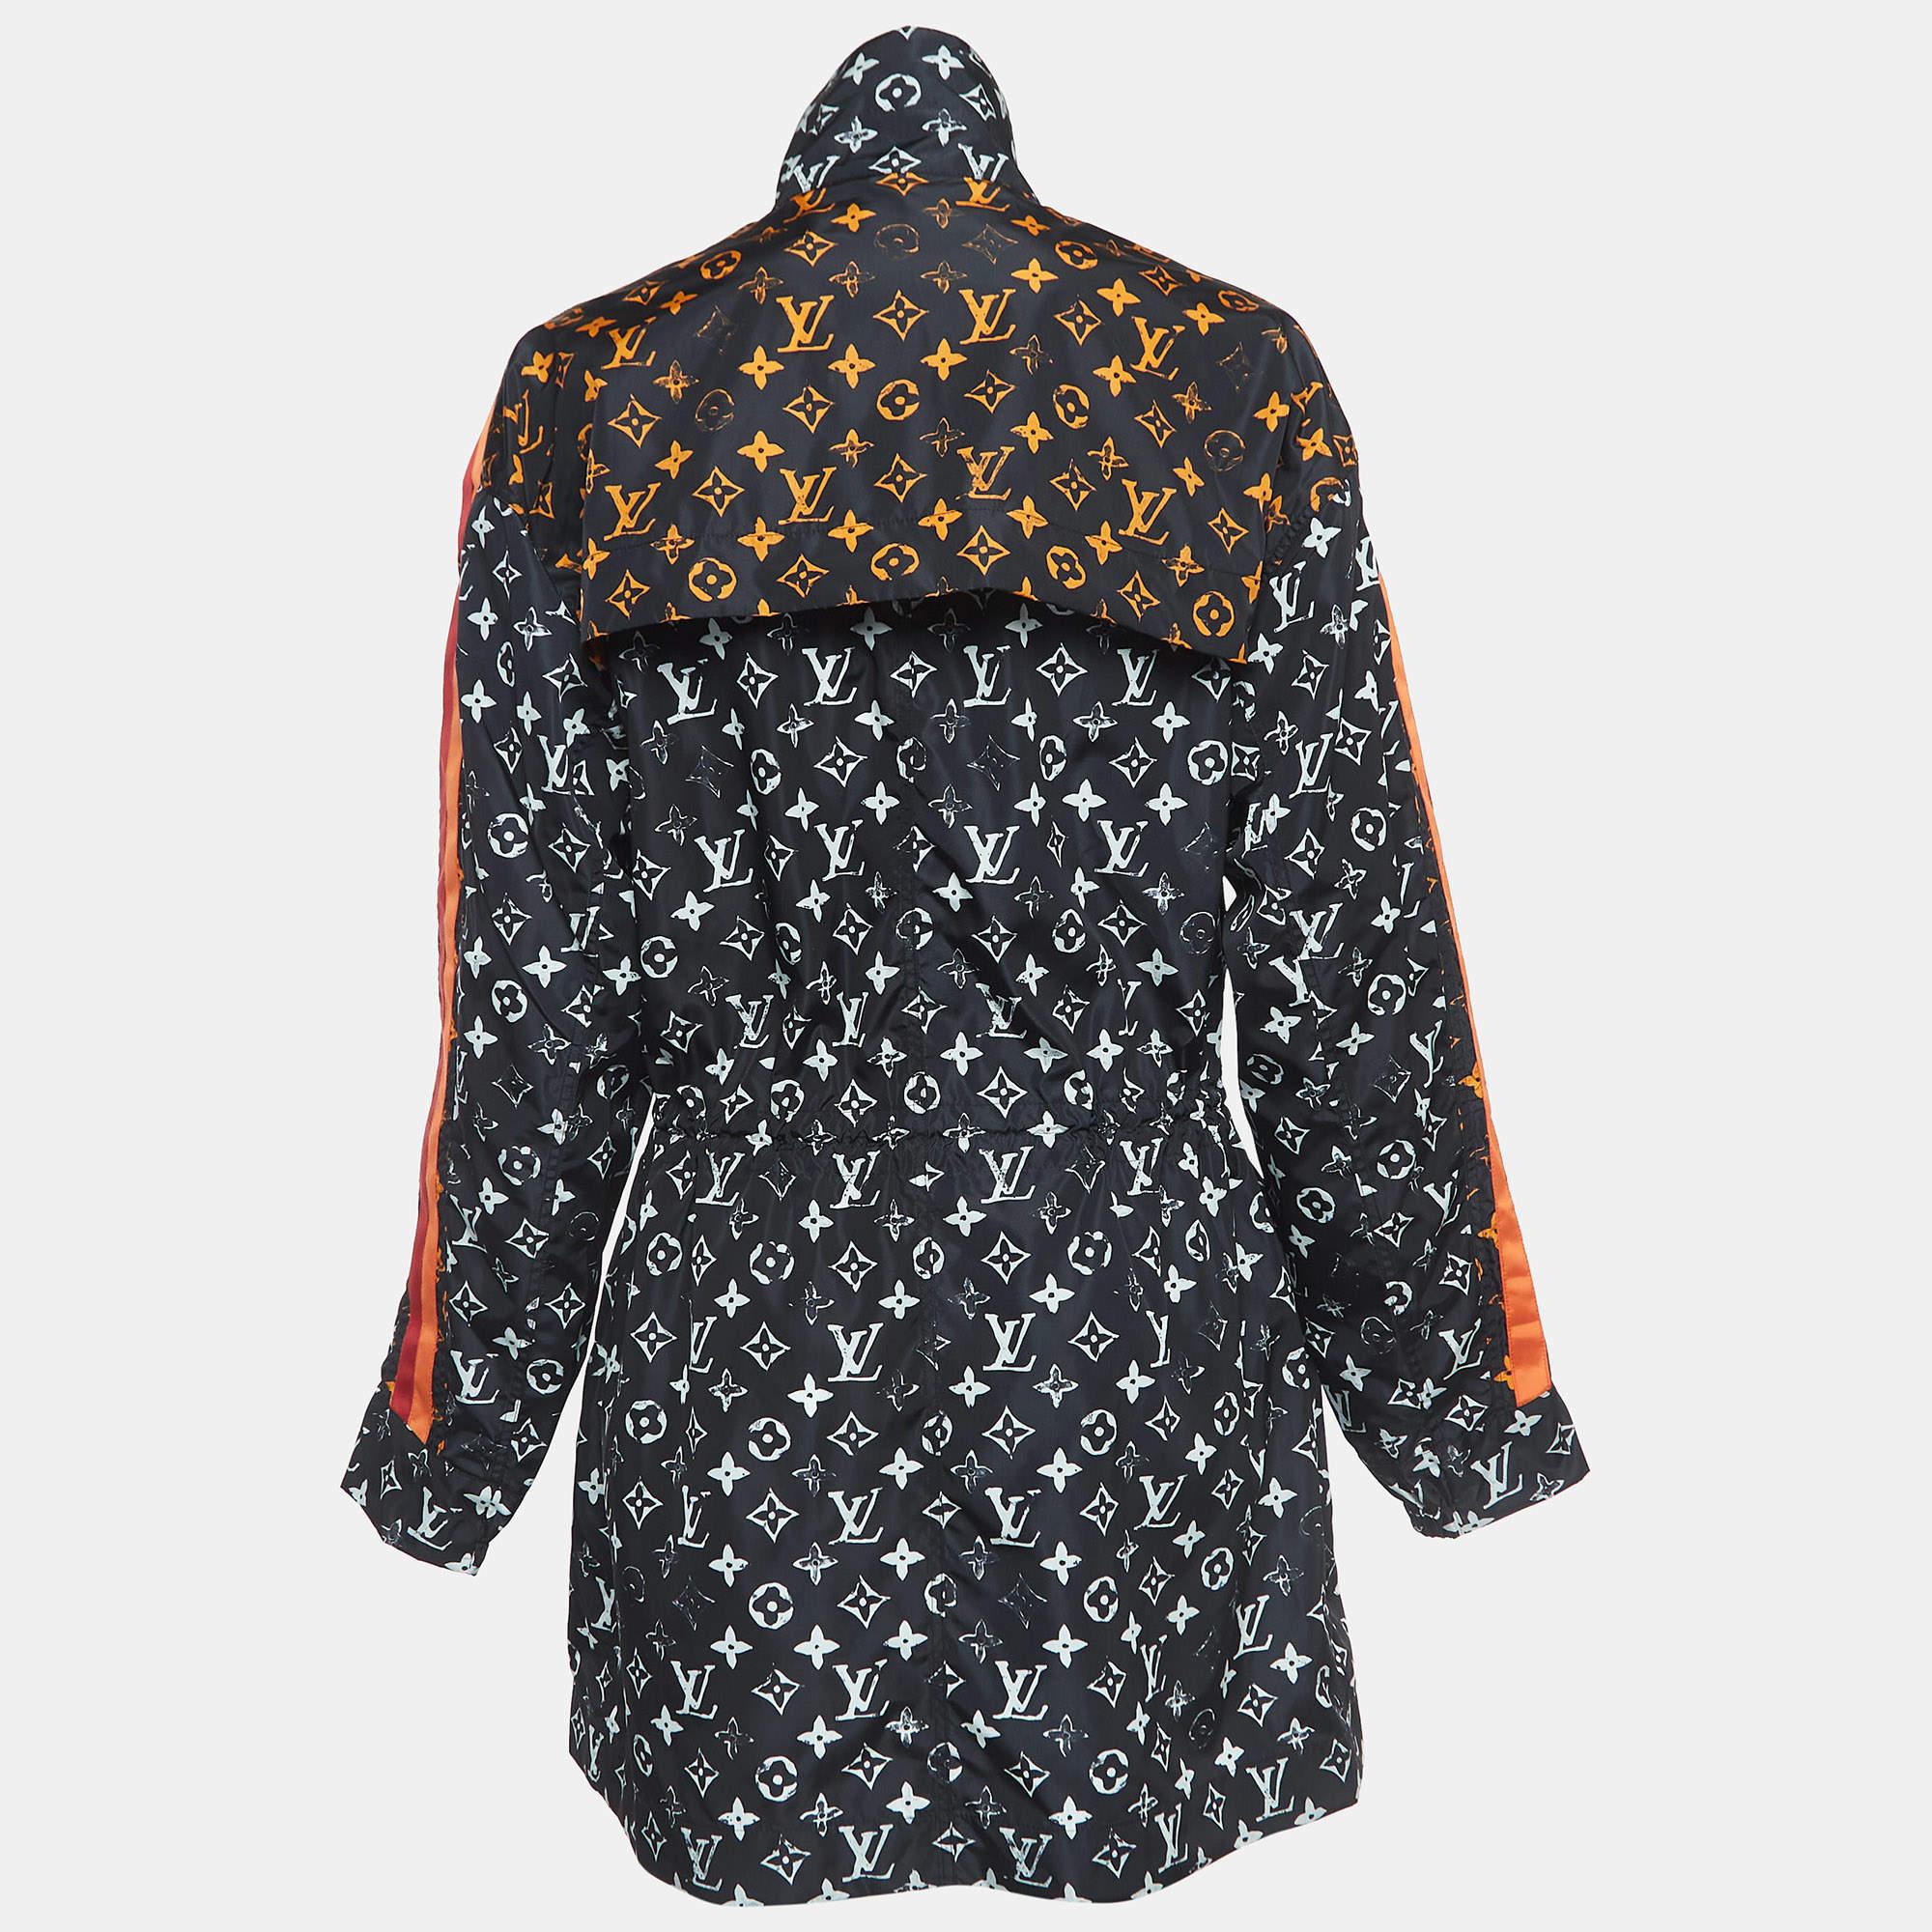 The Louis Vuitton jacket exudes luxury with its iconic monogram pattern. Crafted from high-quality nylon, it features a stylish zip front, offering a contemporary and sophisticated aesthetic for the fashion-forward individual.

